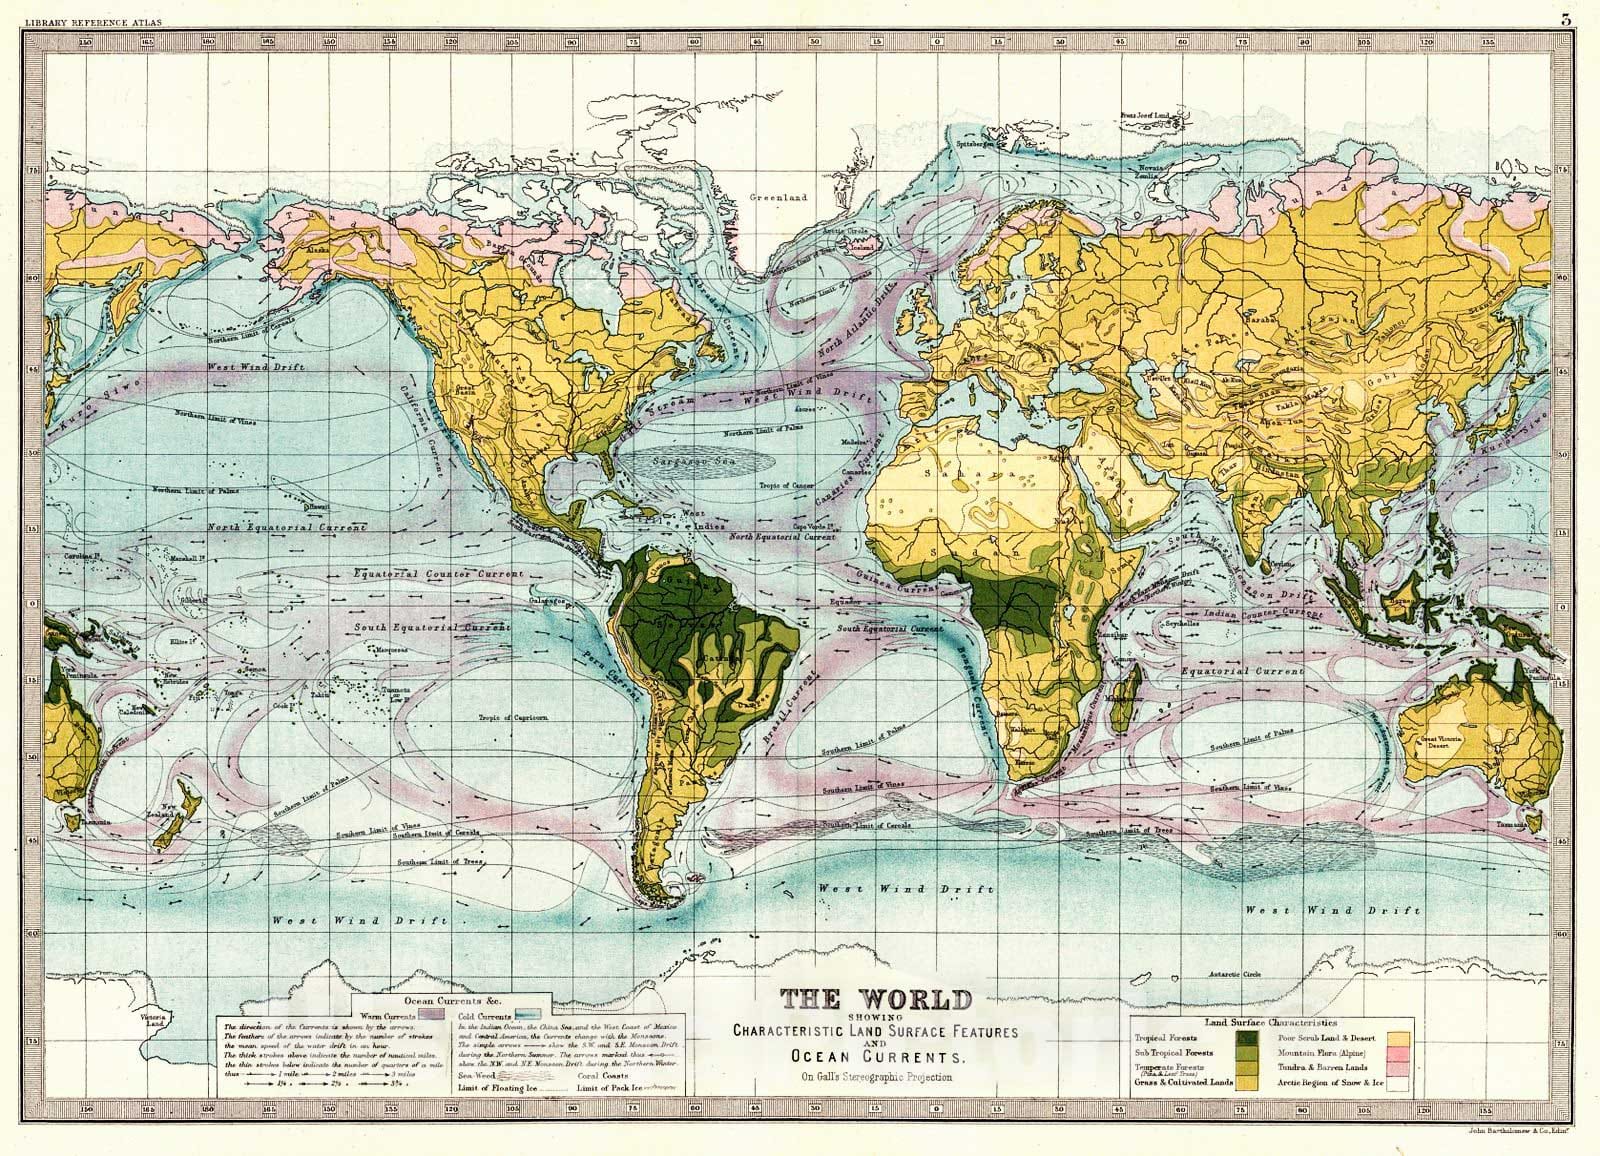 Historic Map : 1890 The World Showing Characteristic Land Surface Features and Ocean Currents : Vintage Wall Art